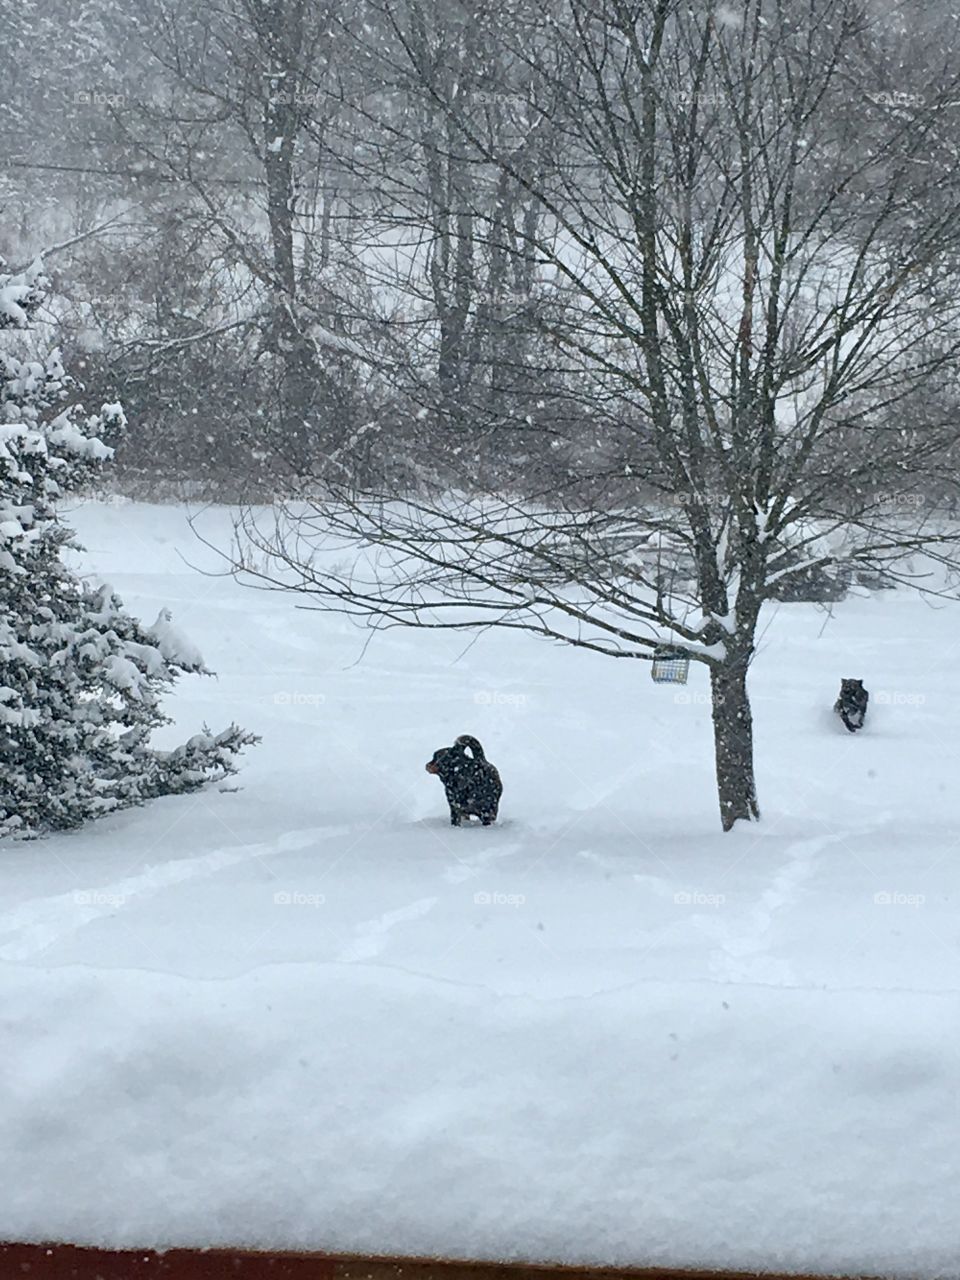 Running up the hill, playing in the snow 